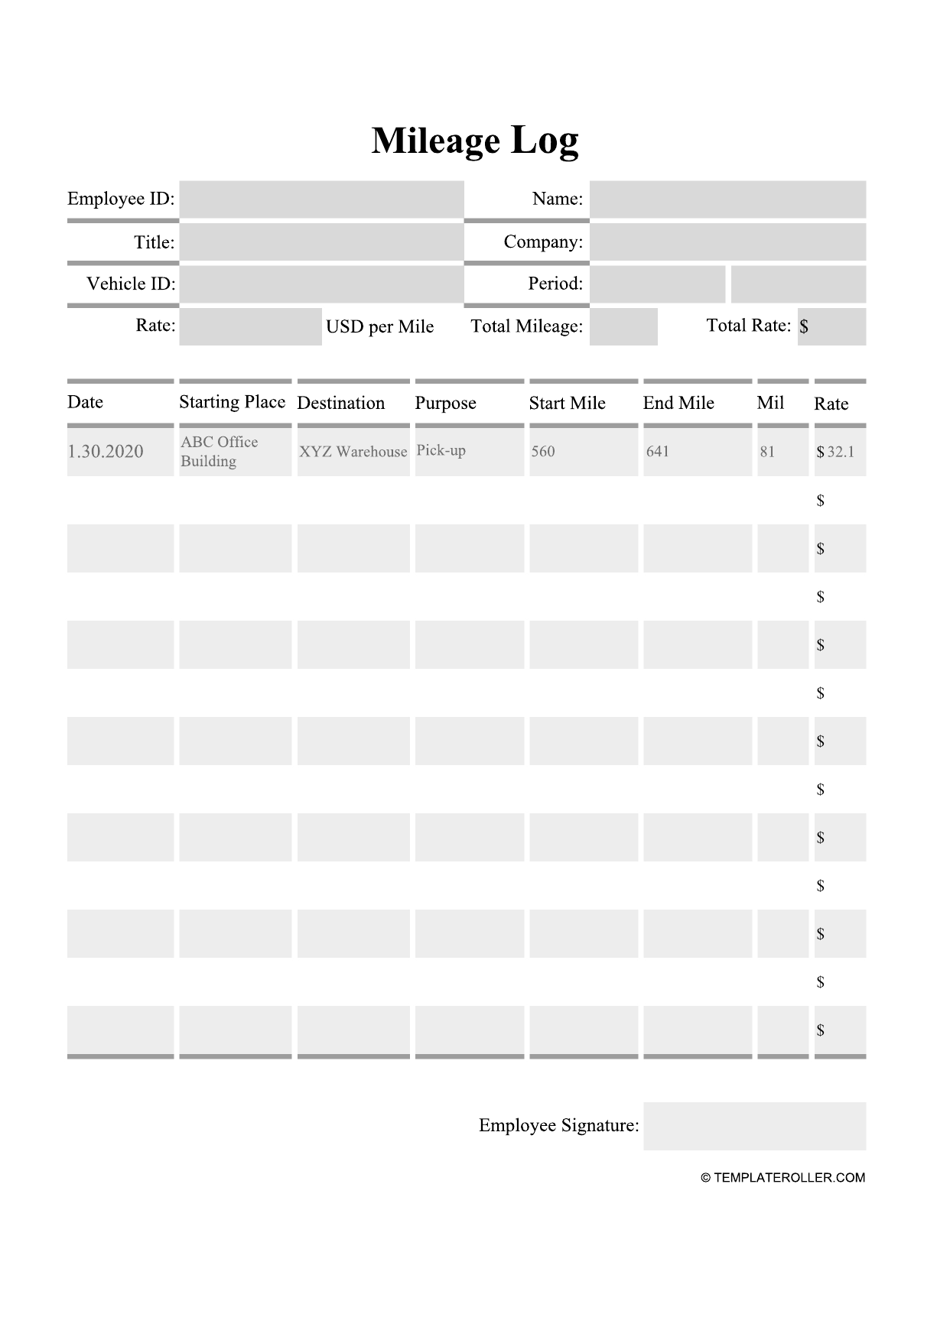 Mileage Log Template Download Printable PDF  Templateroller With Regard To Gas Mileage Expense Report Template